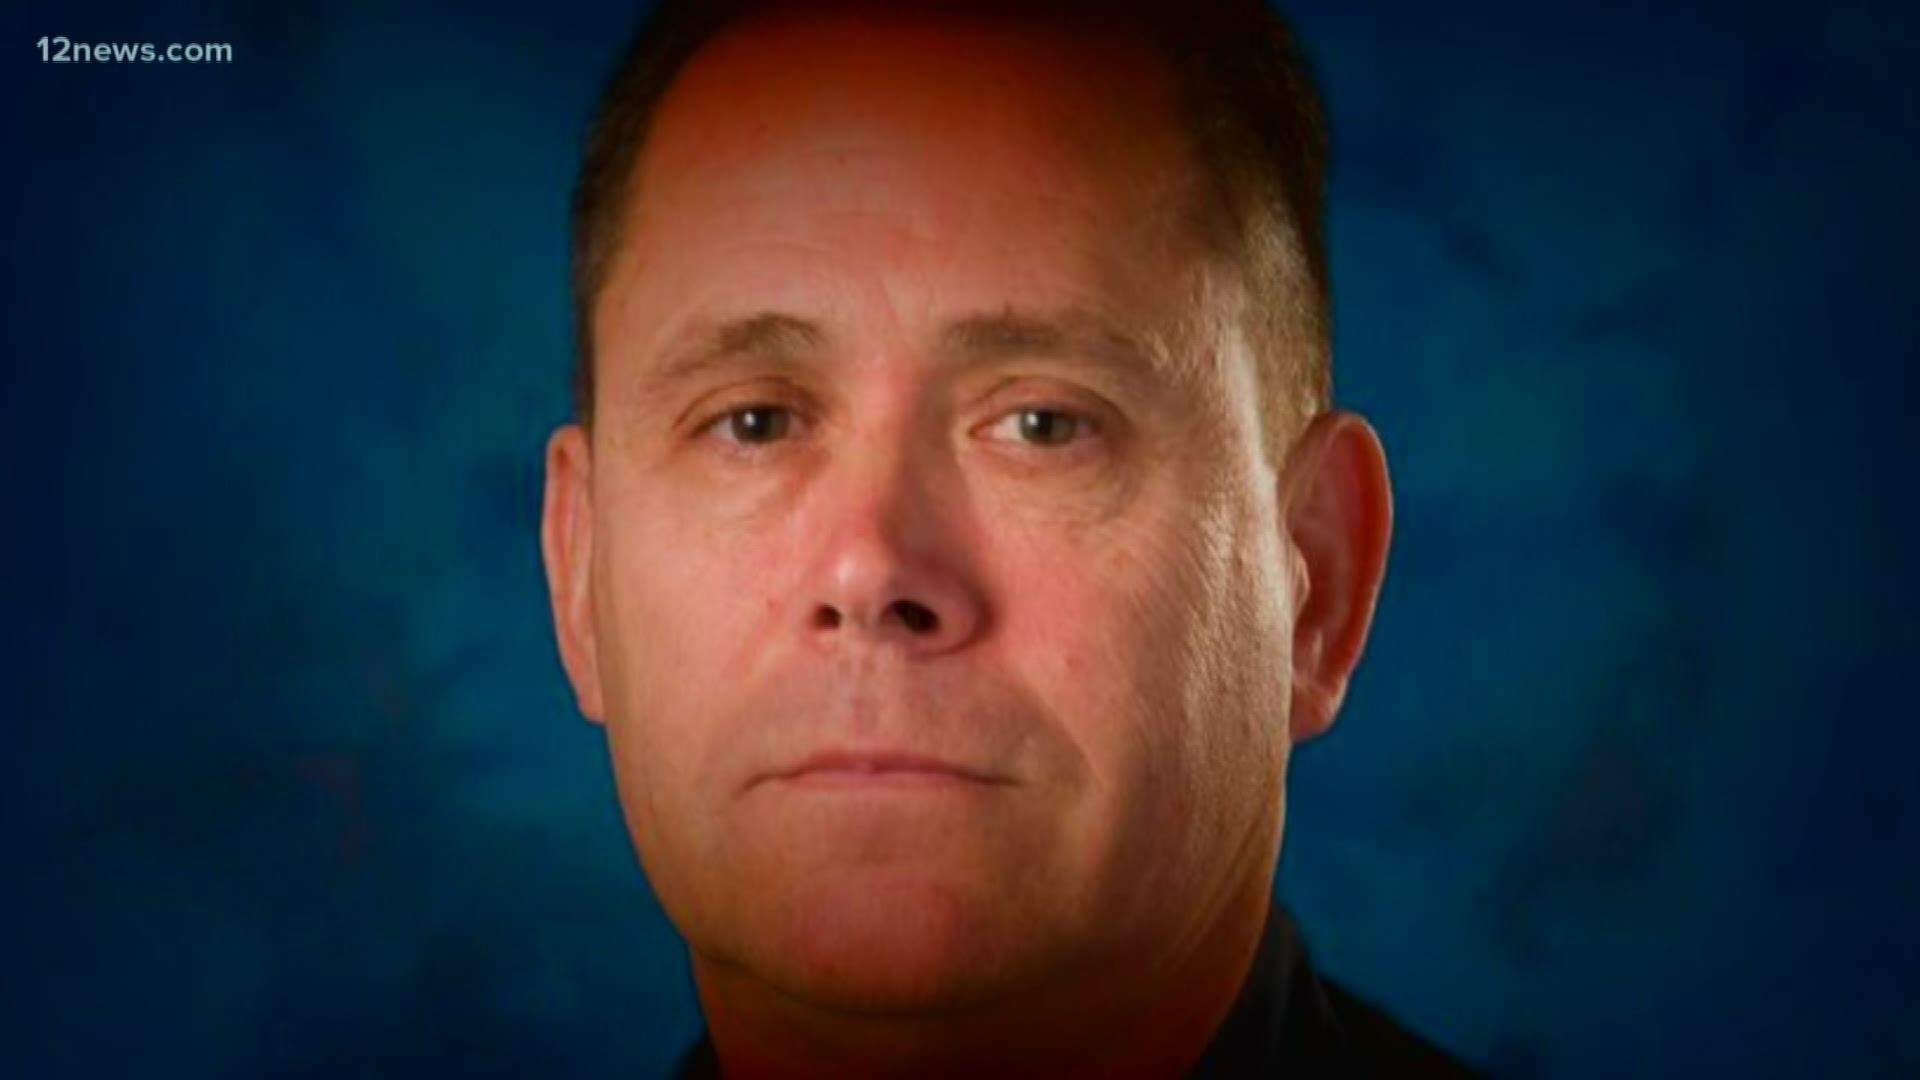 Those who loved Phoenix Police Commander Greg Carnicle said their goodbyes. Carnicle was killed in the line of duty just over a week ago.